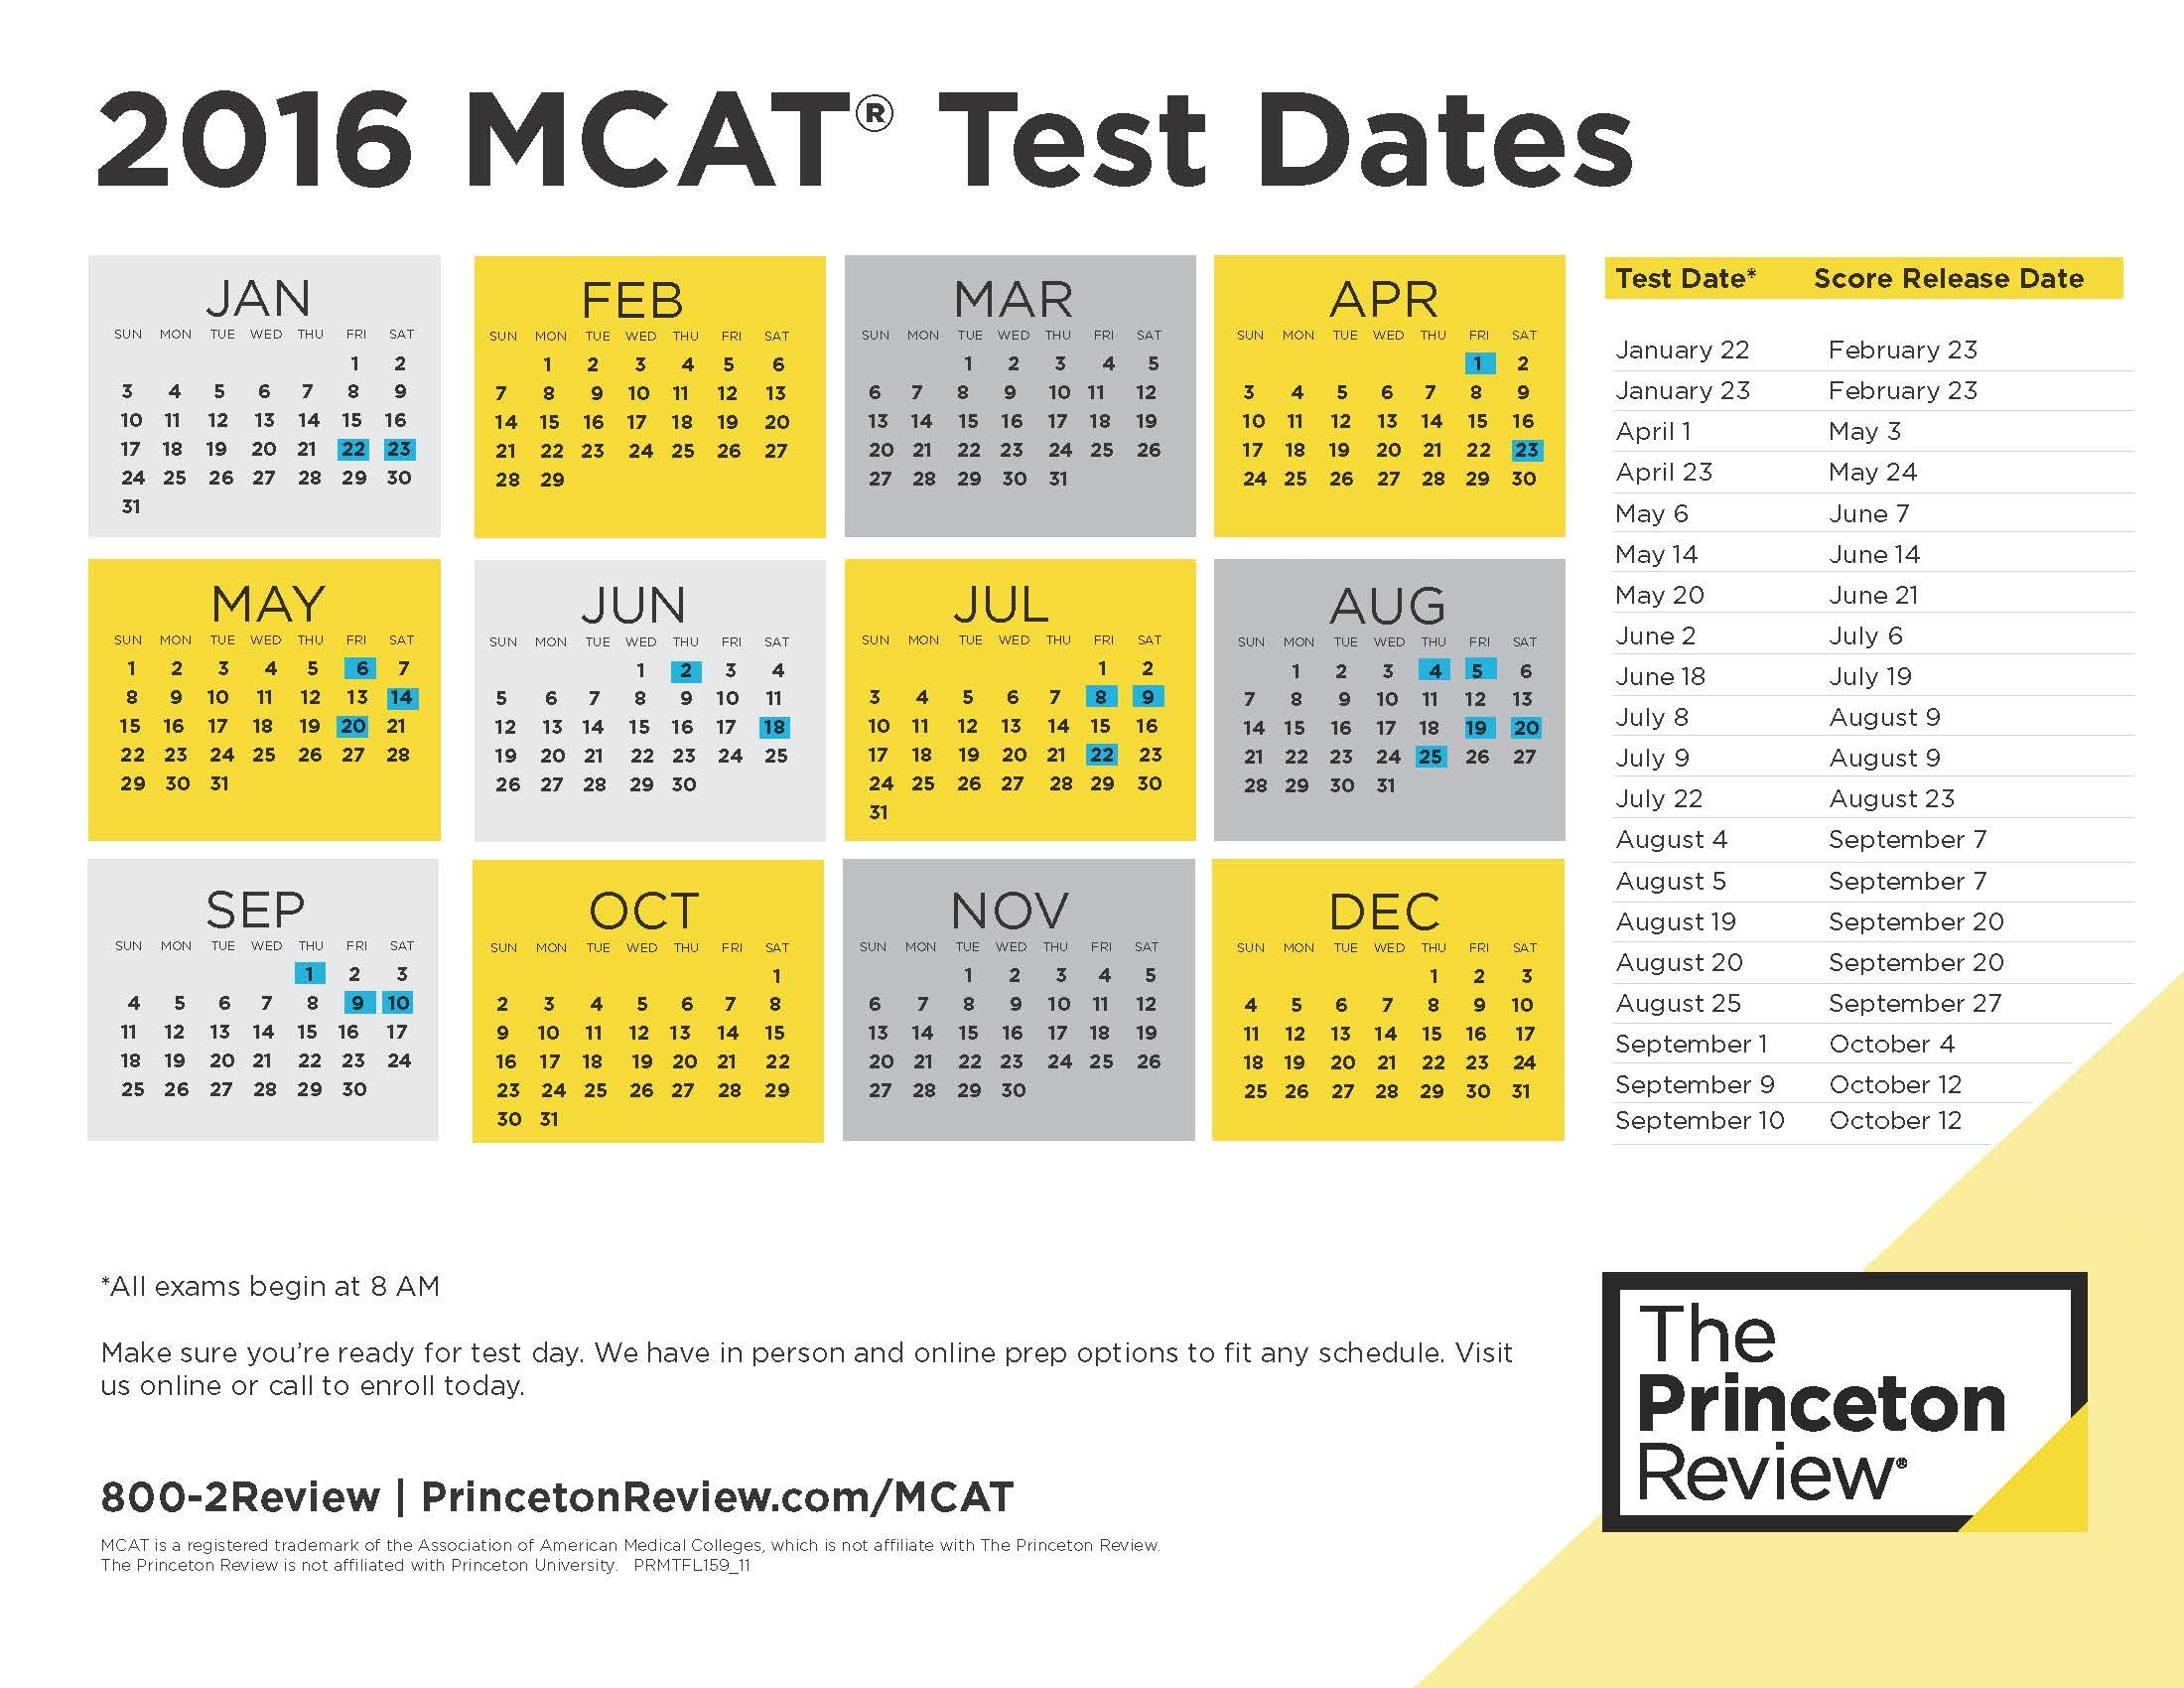 Woodsworth College Students Association Save On Mcat Courses With